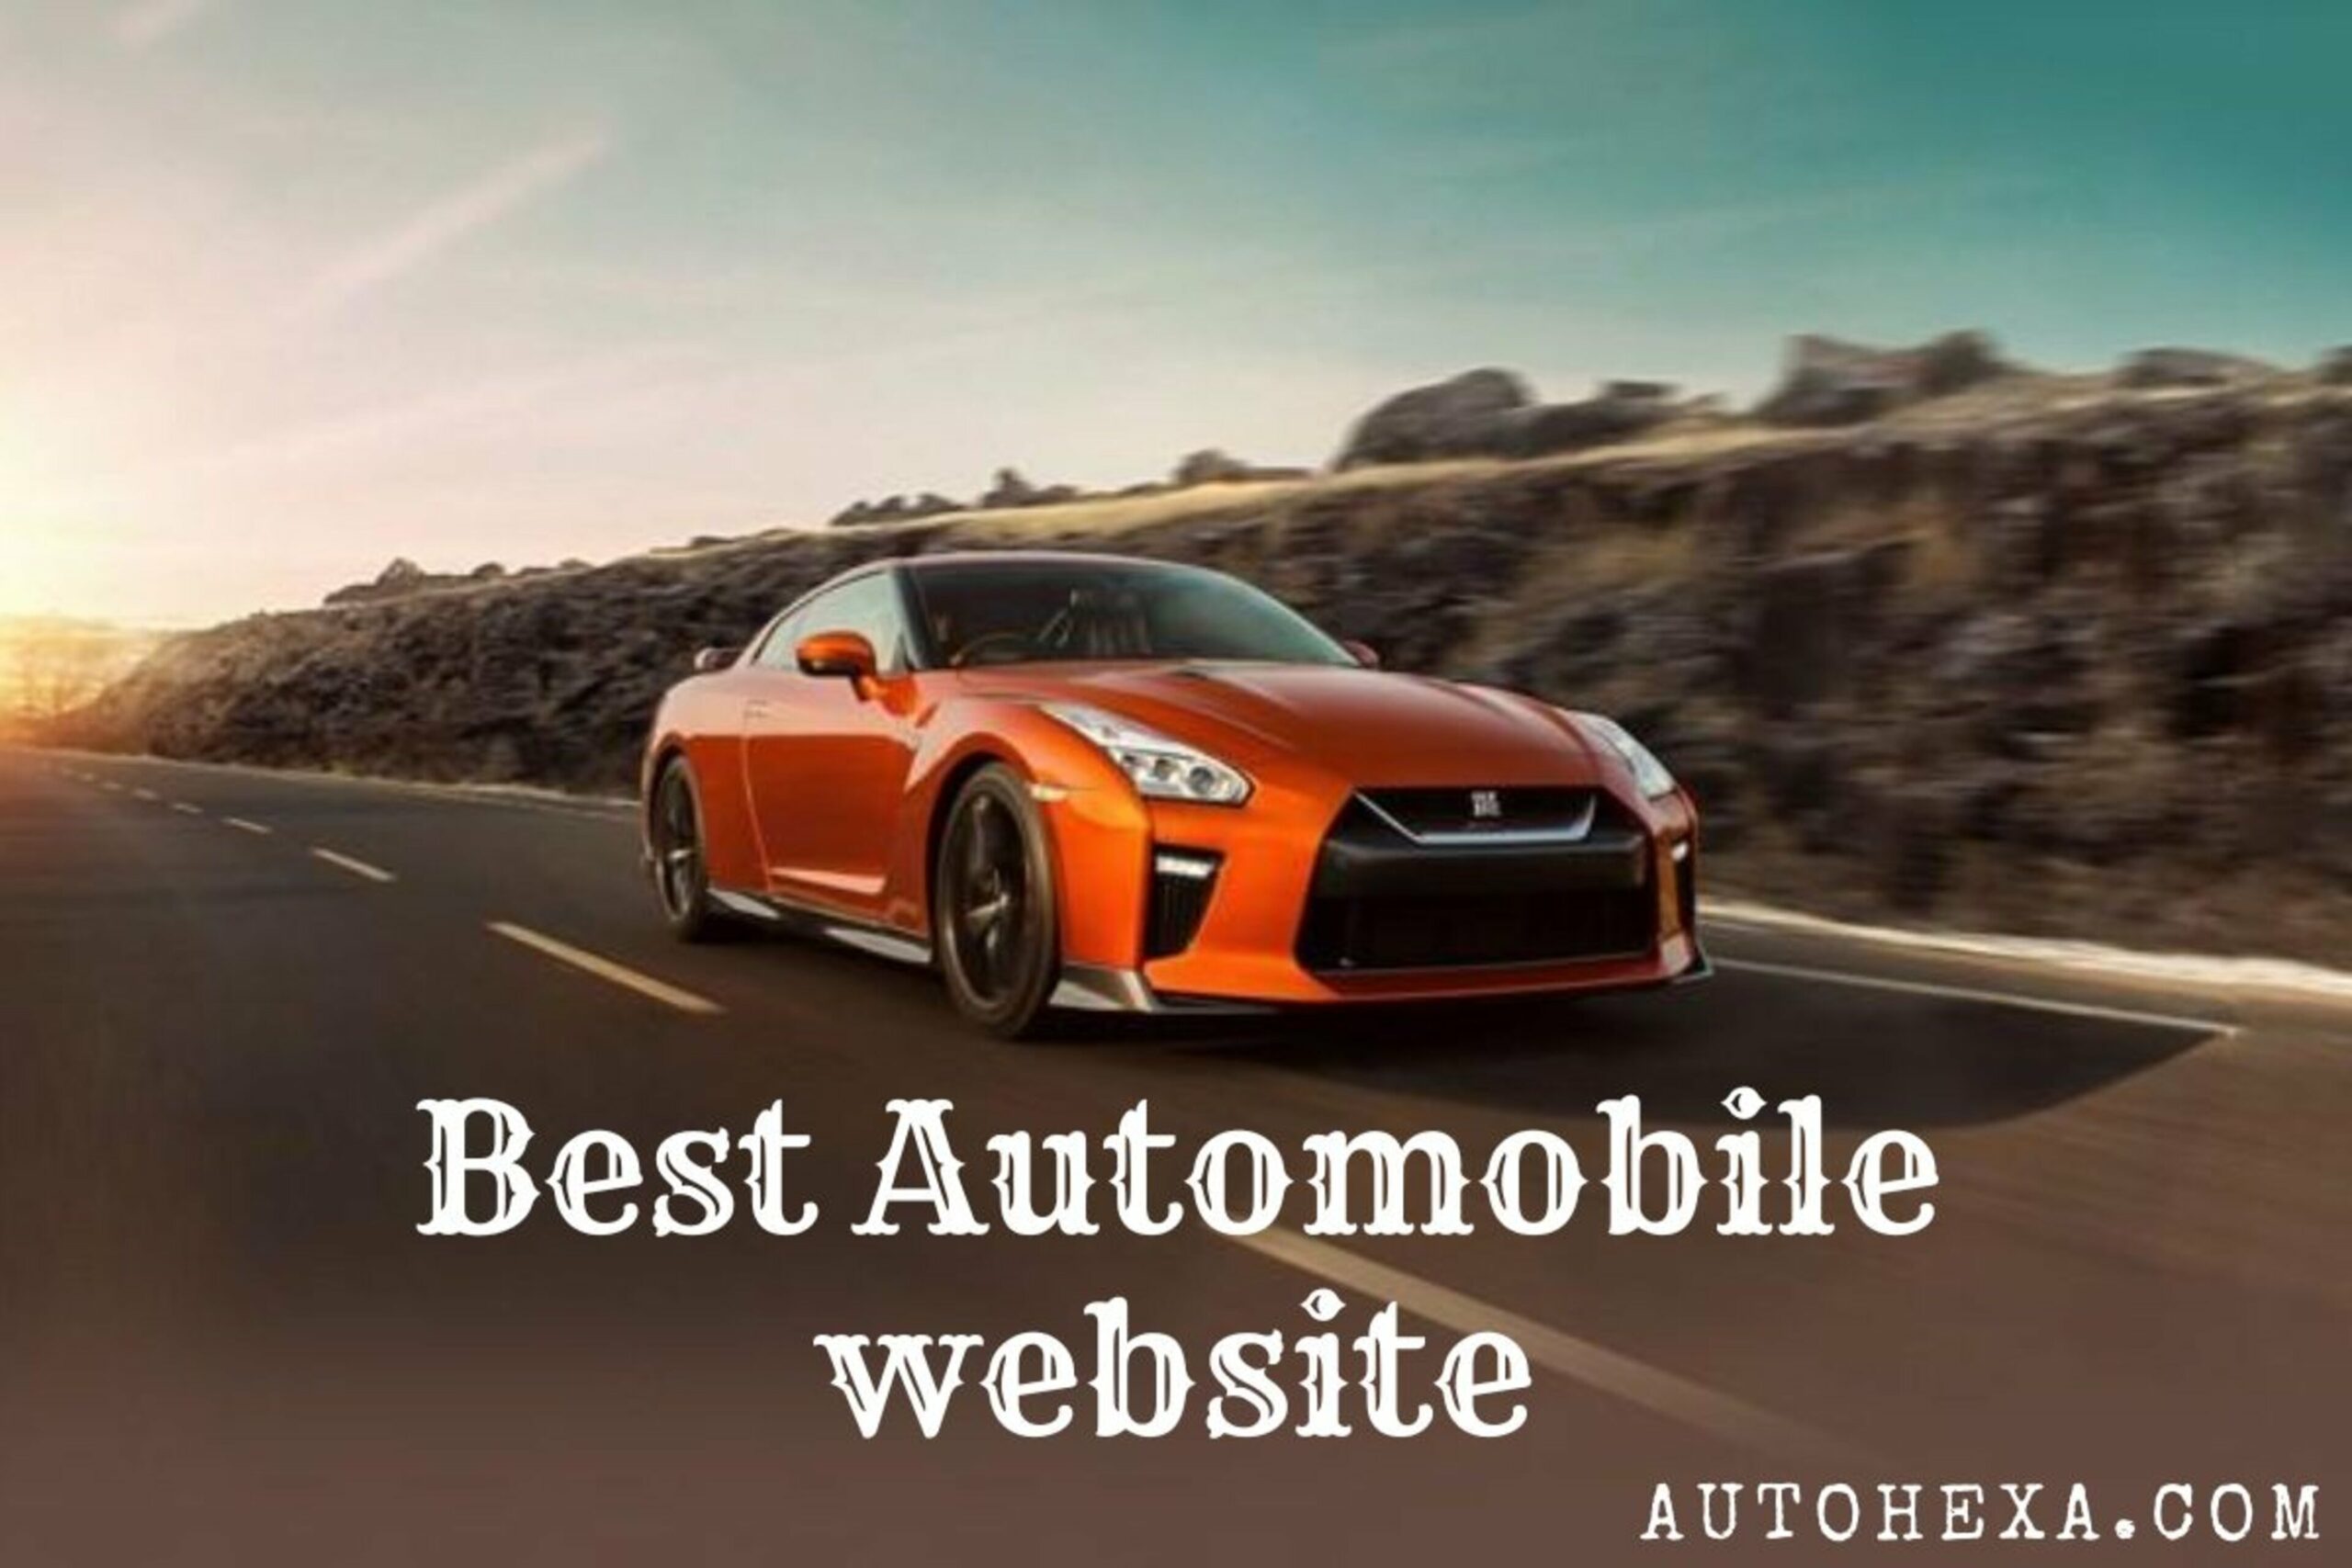 Autohexa: Best Automobile Website in India and USA